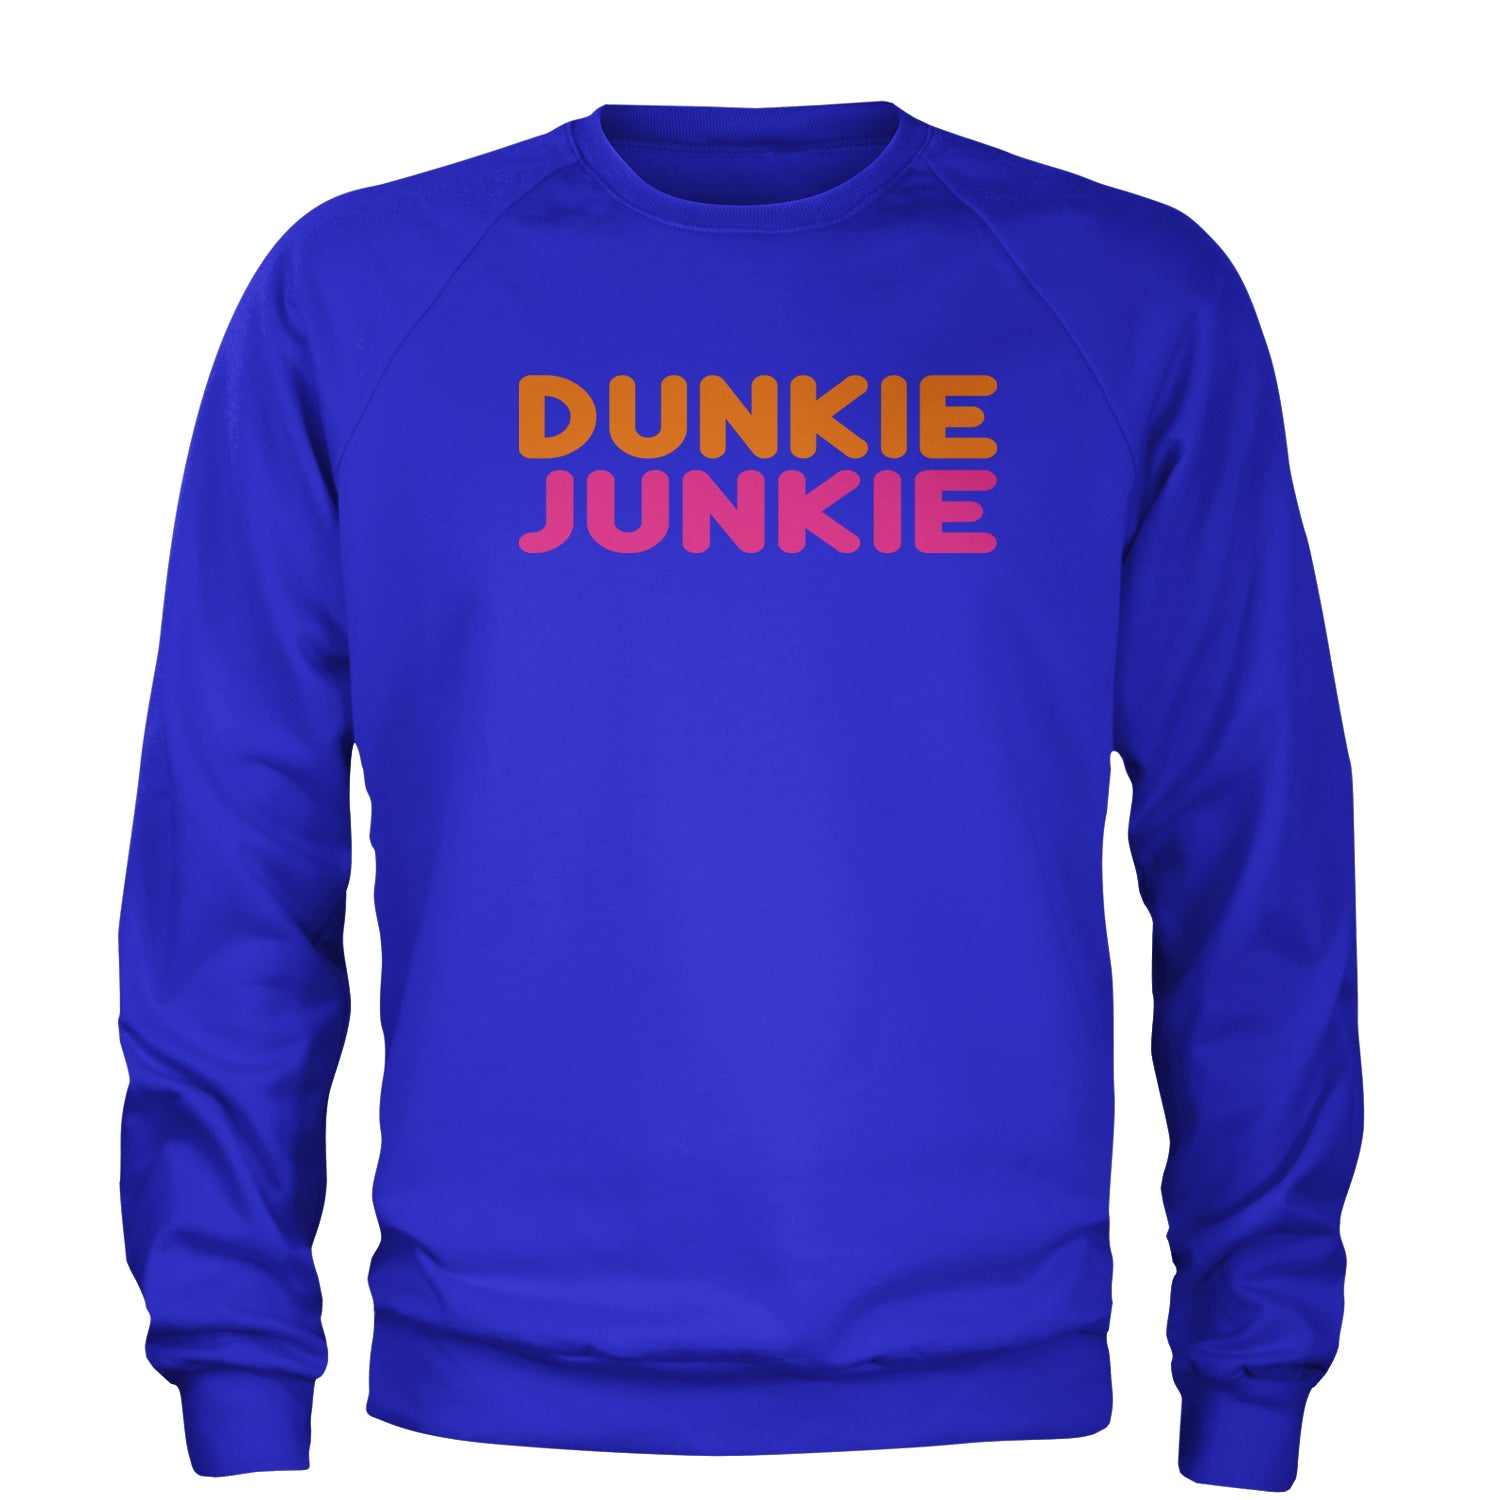 Dunkie Junkie Adult Crewneck Sweatshirt addict, capuccino, coffee, dd, dnkn, dunkin, dunking, latte by Expression Tees